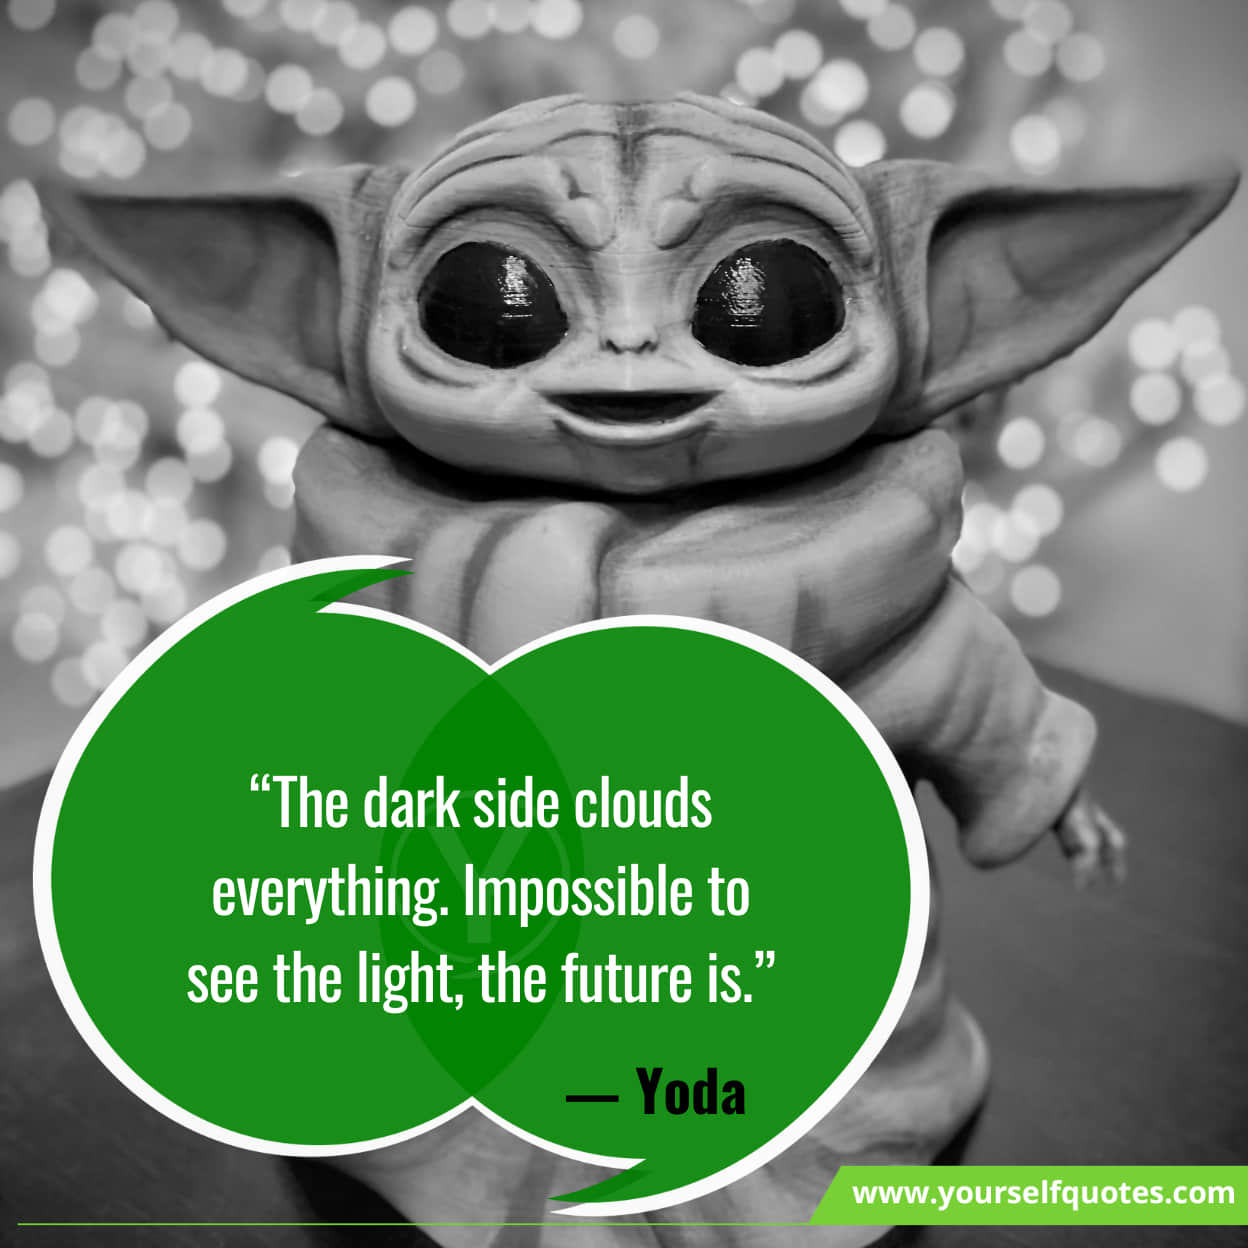 66+ Yoda Quotes That Will Help You Understand Yourself & Life